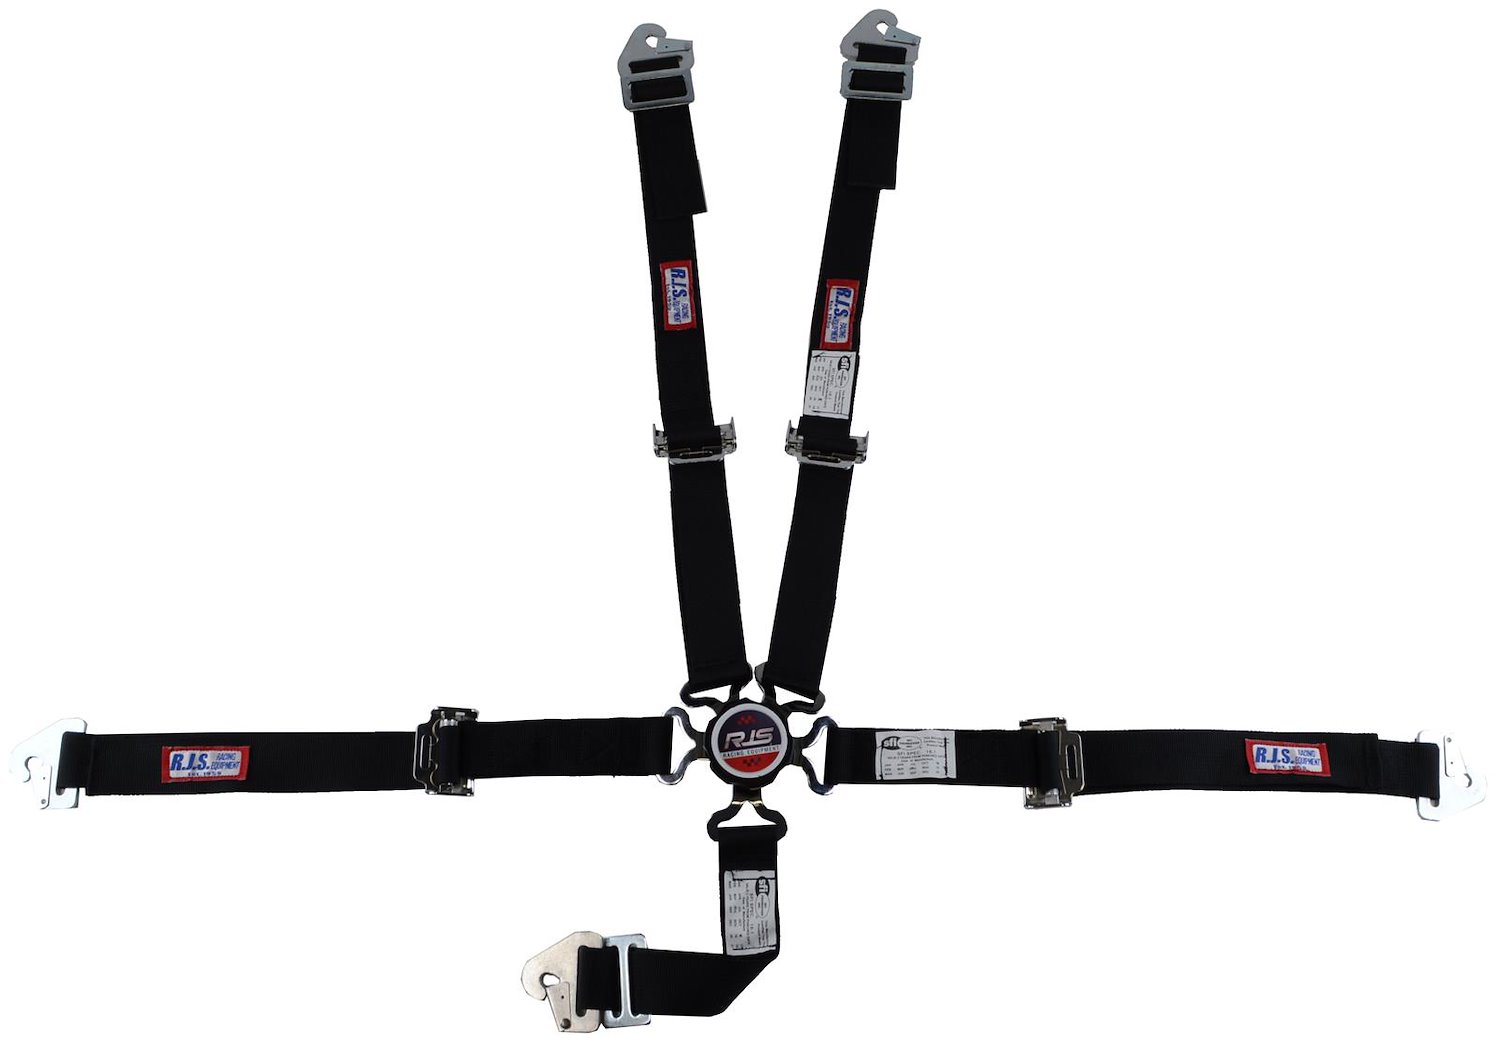 SFI 16.1 CAM-LOCK HARNESS 2 PULL UP Lap Belt 2 Shoulder Harness U ROLL BAR Mount 2 DOUBLE Sub ALL WRAP ENDS RED